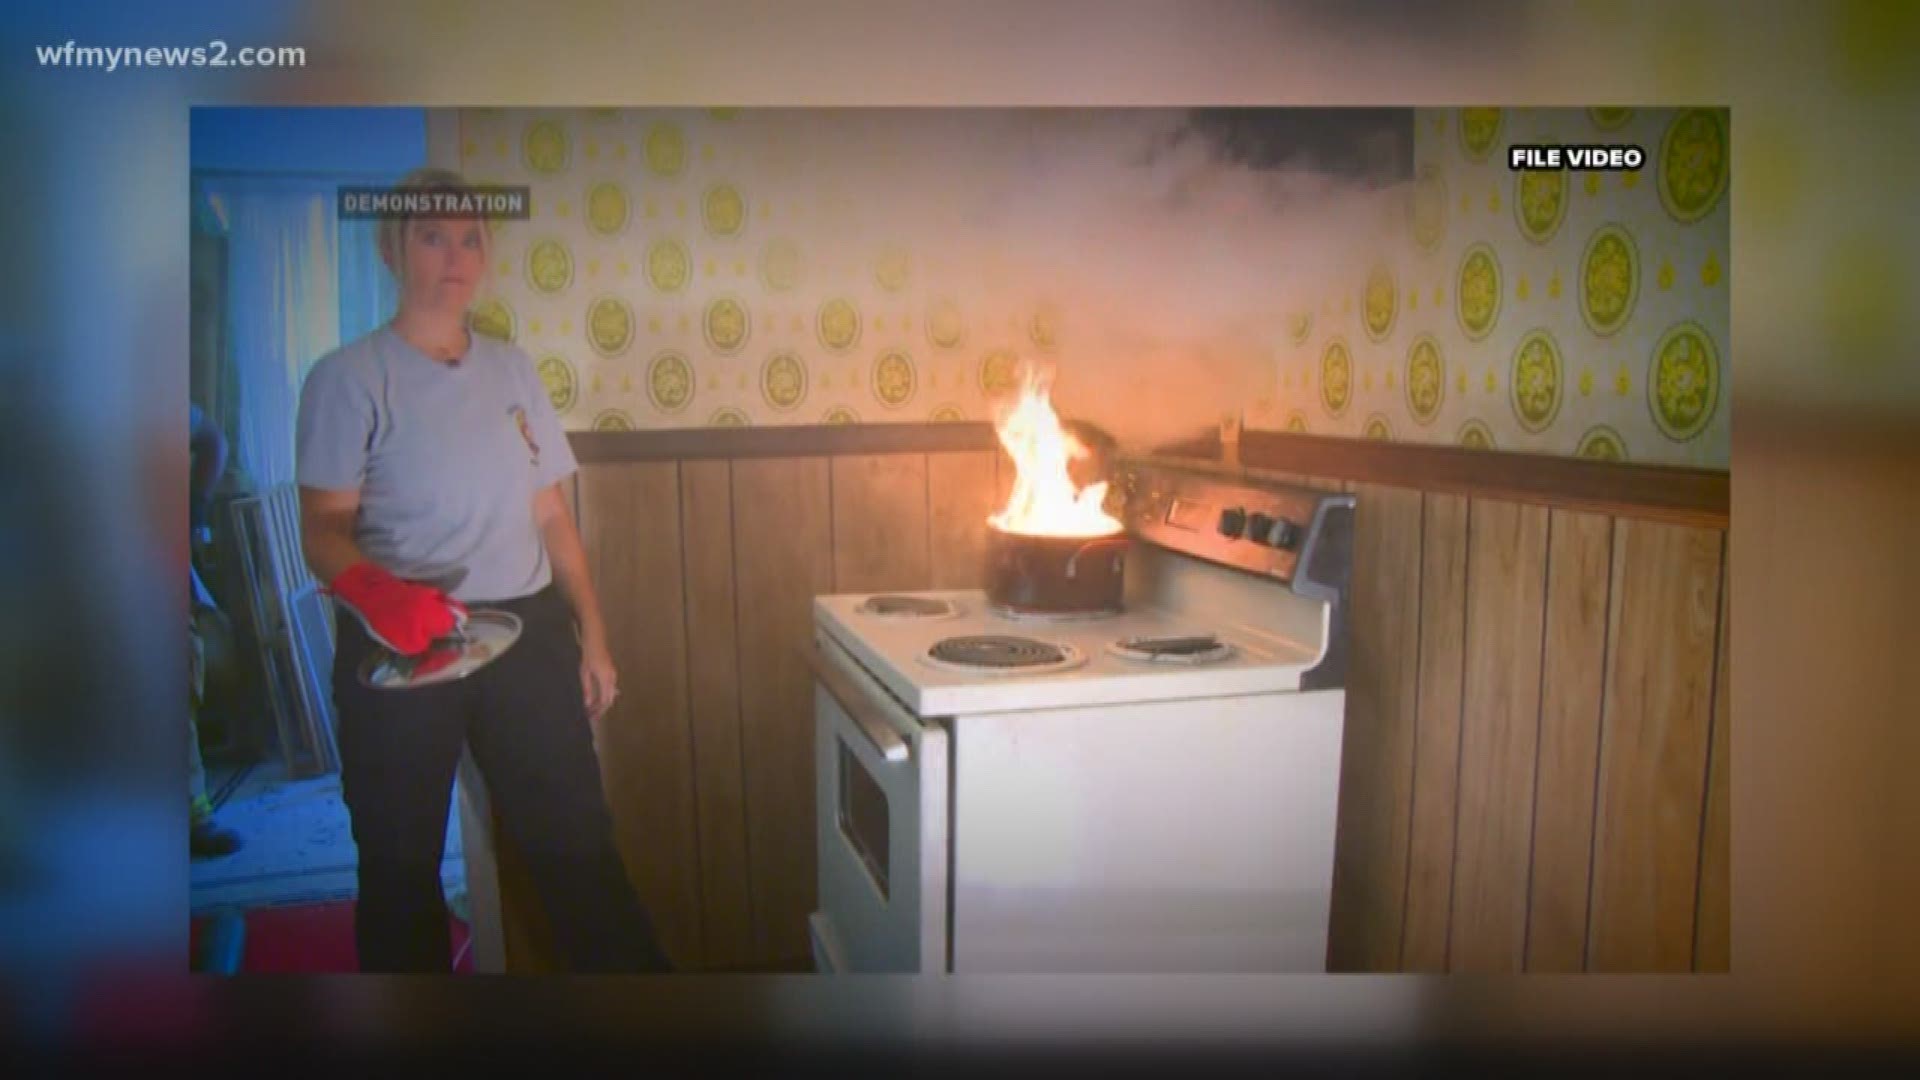 Cooking is the number one cause of home fires and home injuries.